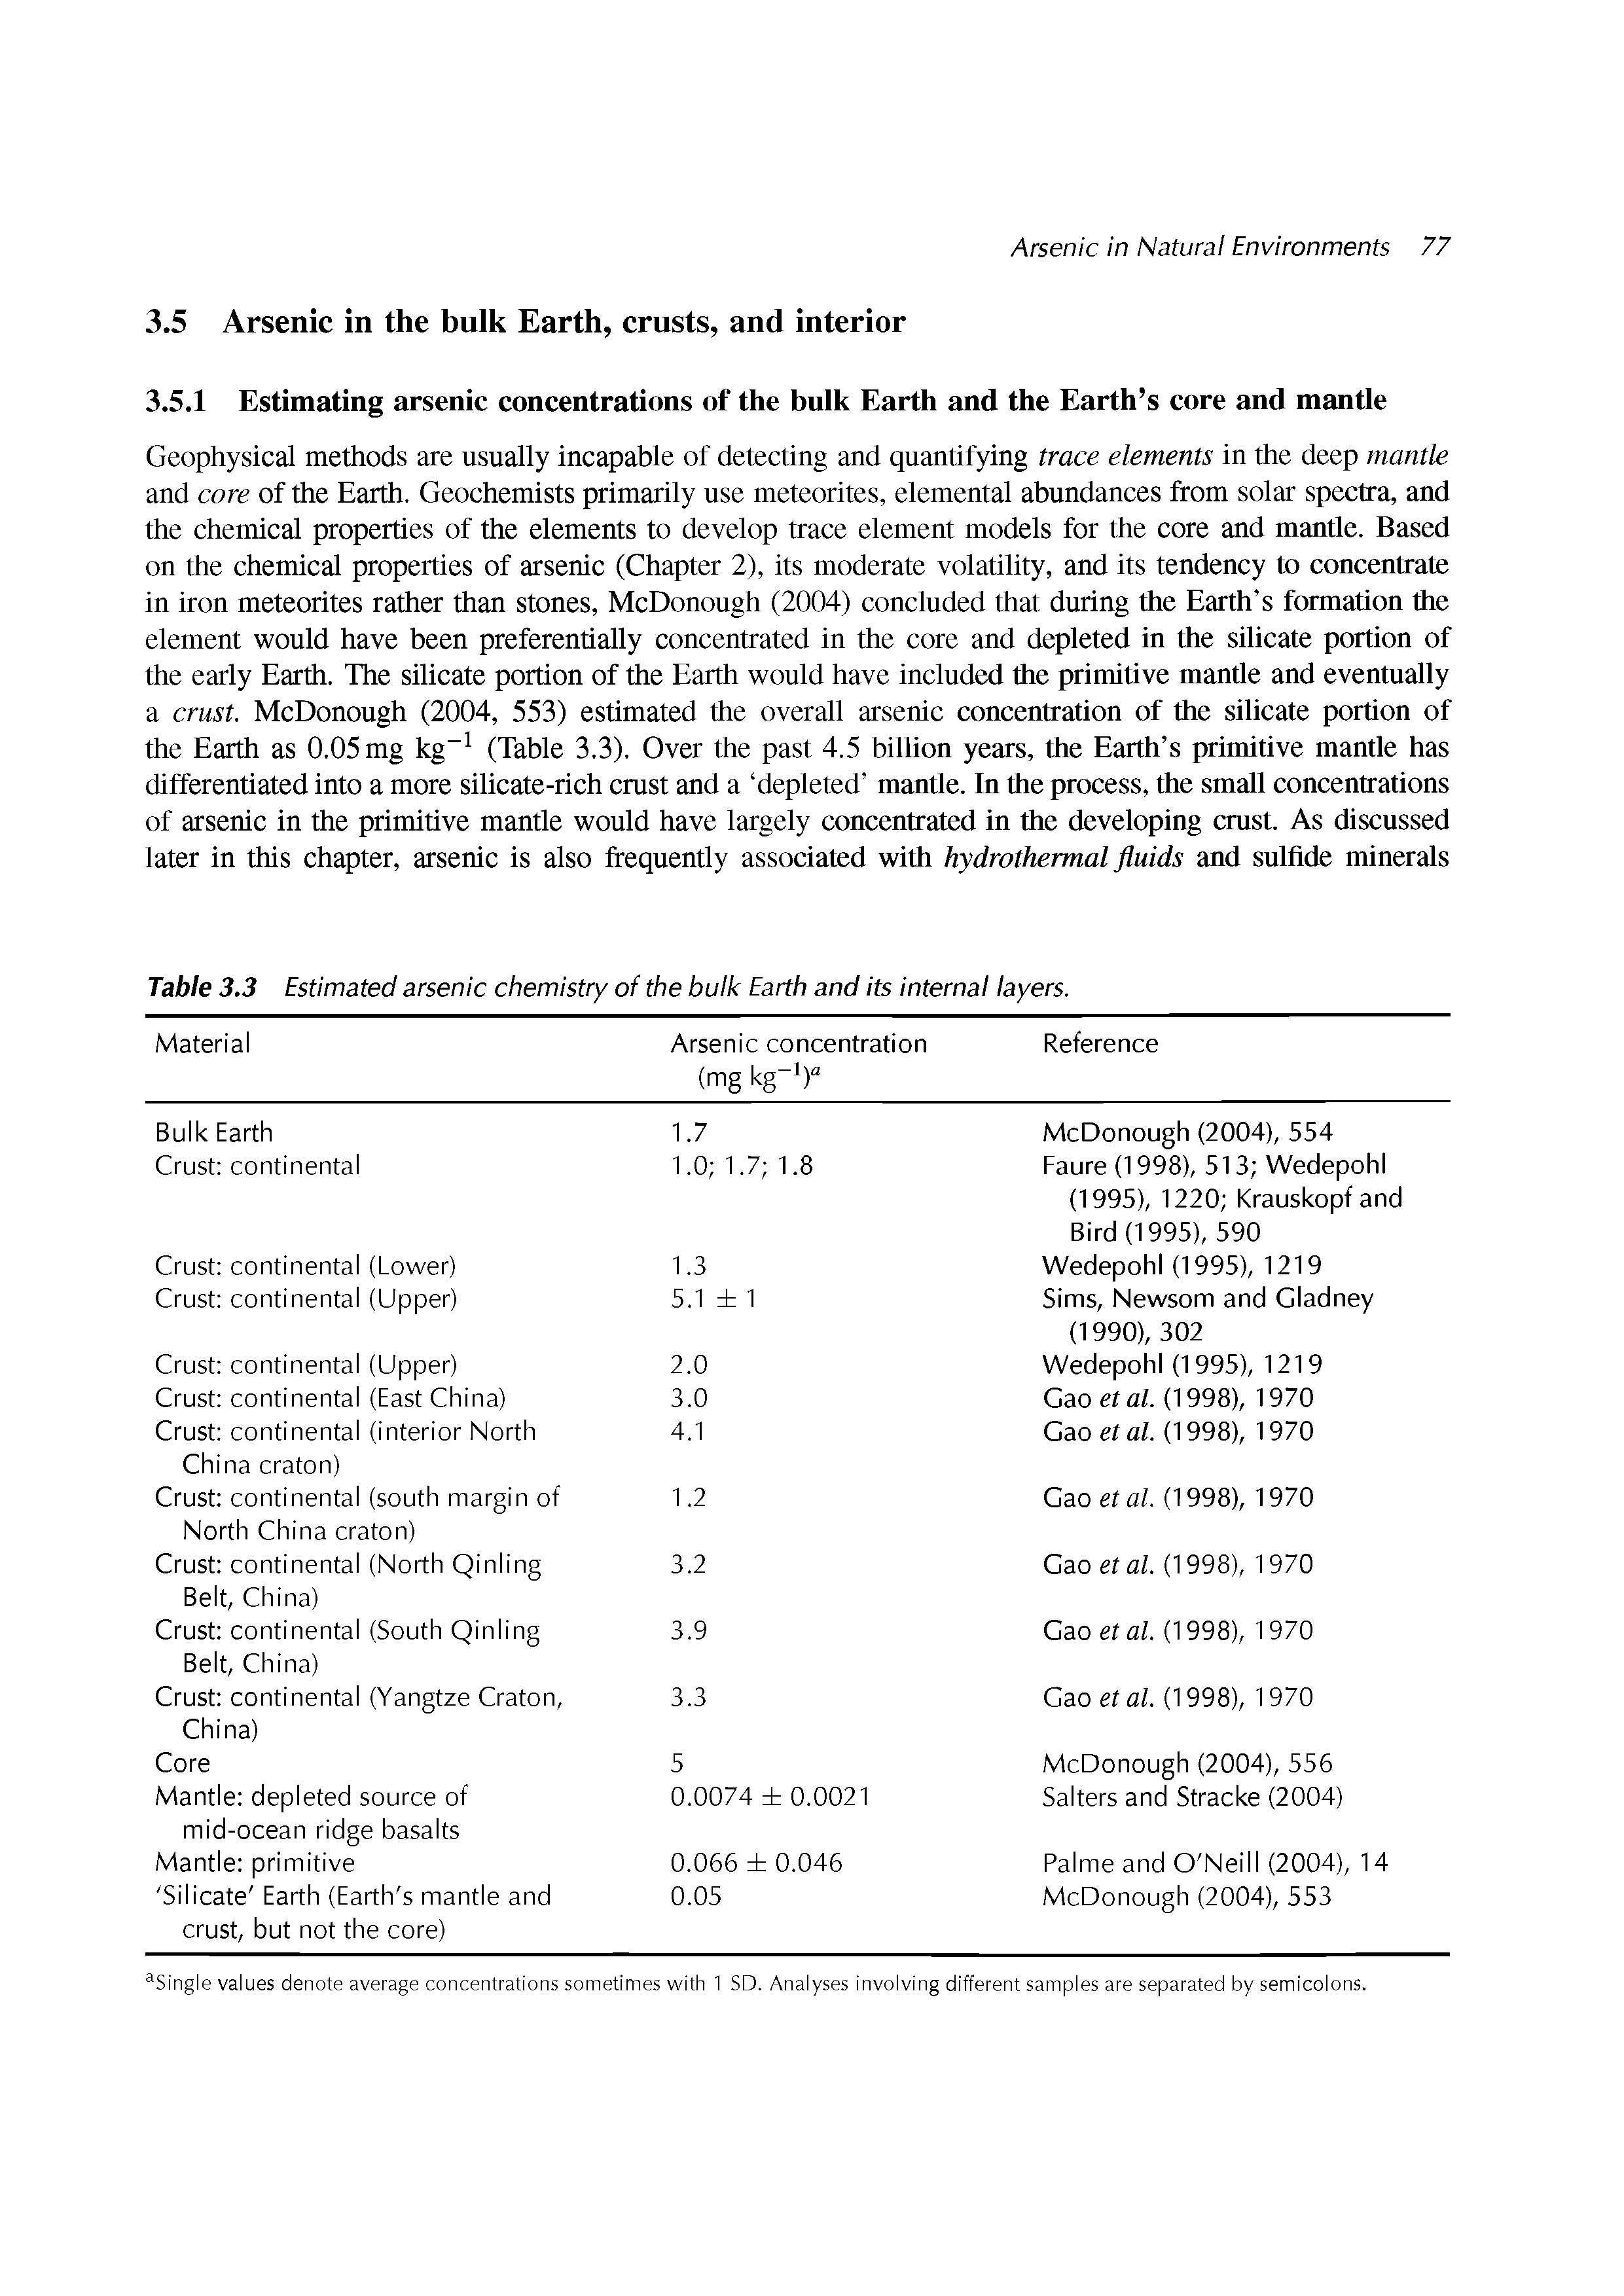 Table 3.3 Estimated arsenic chemistry of the bulk Earth and its internal layers.